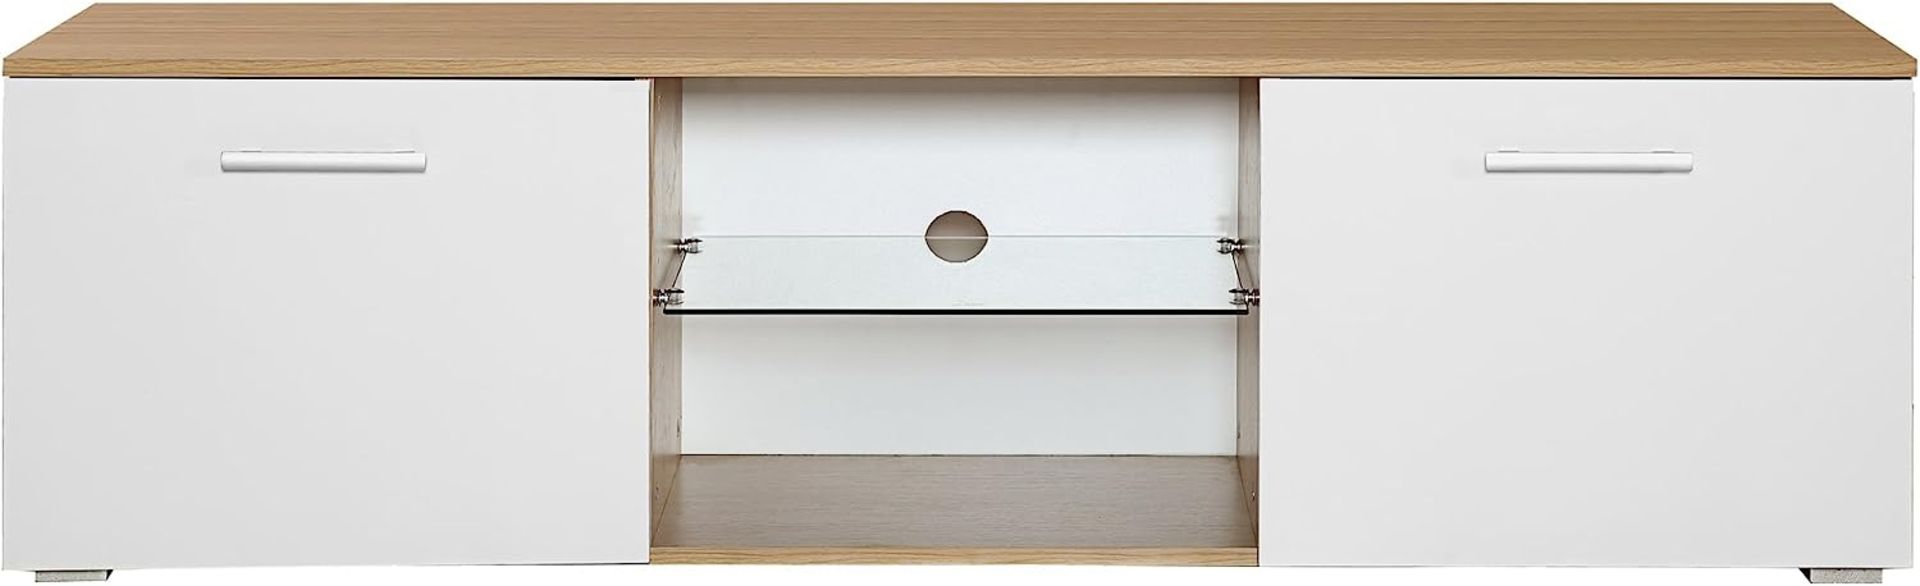 BRAND NEW HARMIN MODERN 160CM TV STAND CABINET UNIT WITH HIGH GLOSS DOORS (WHITE ON OAK) - Image 4 of 9